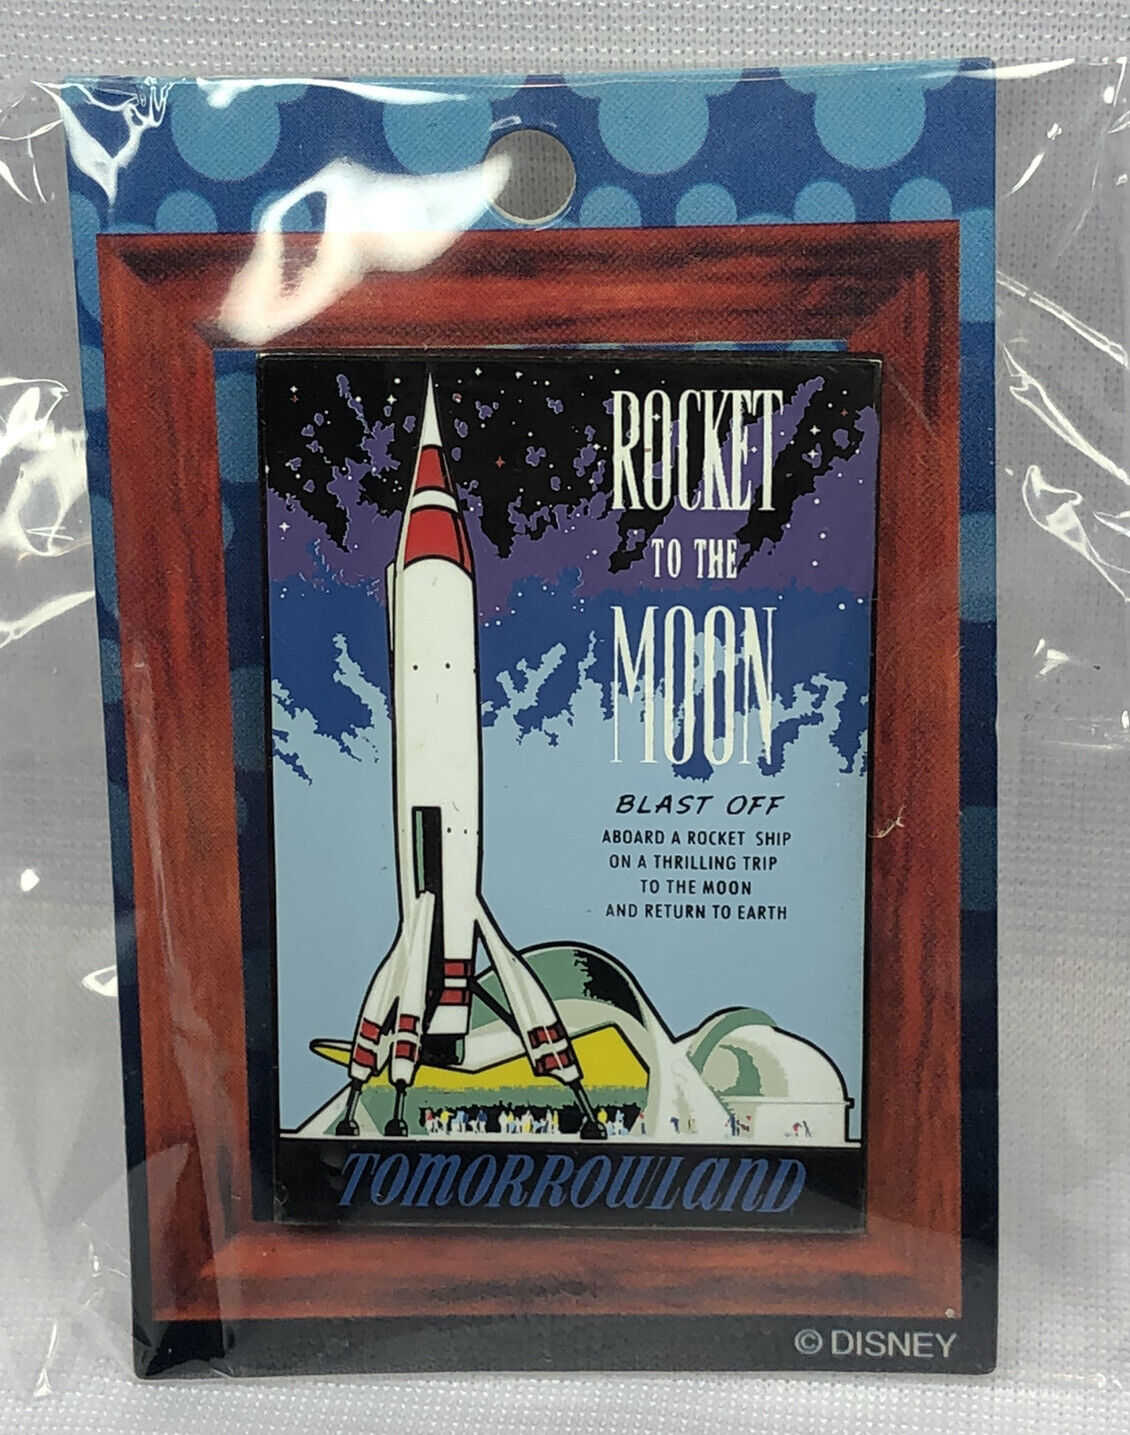 DLR - Framed Attraction Poster - Rocket to the Moon - LE 1500 Disney Pin 27829